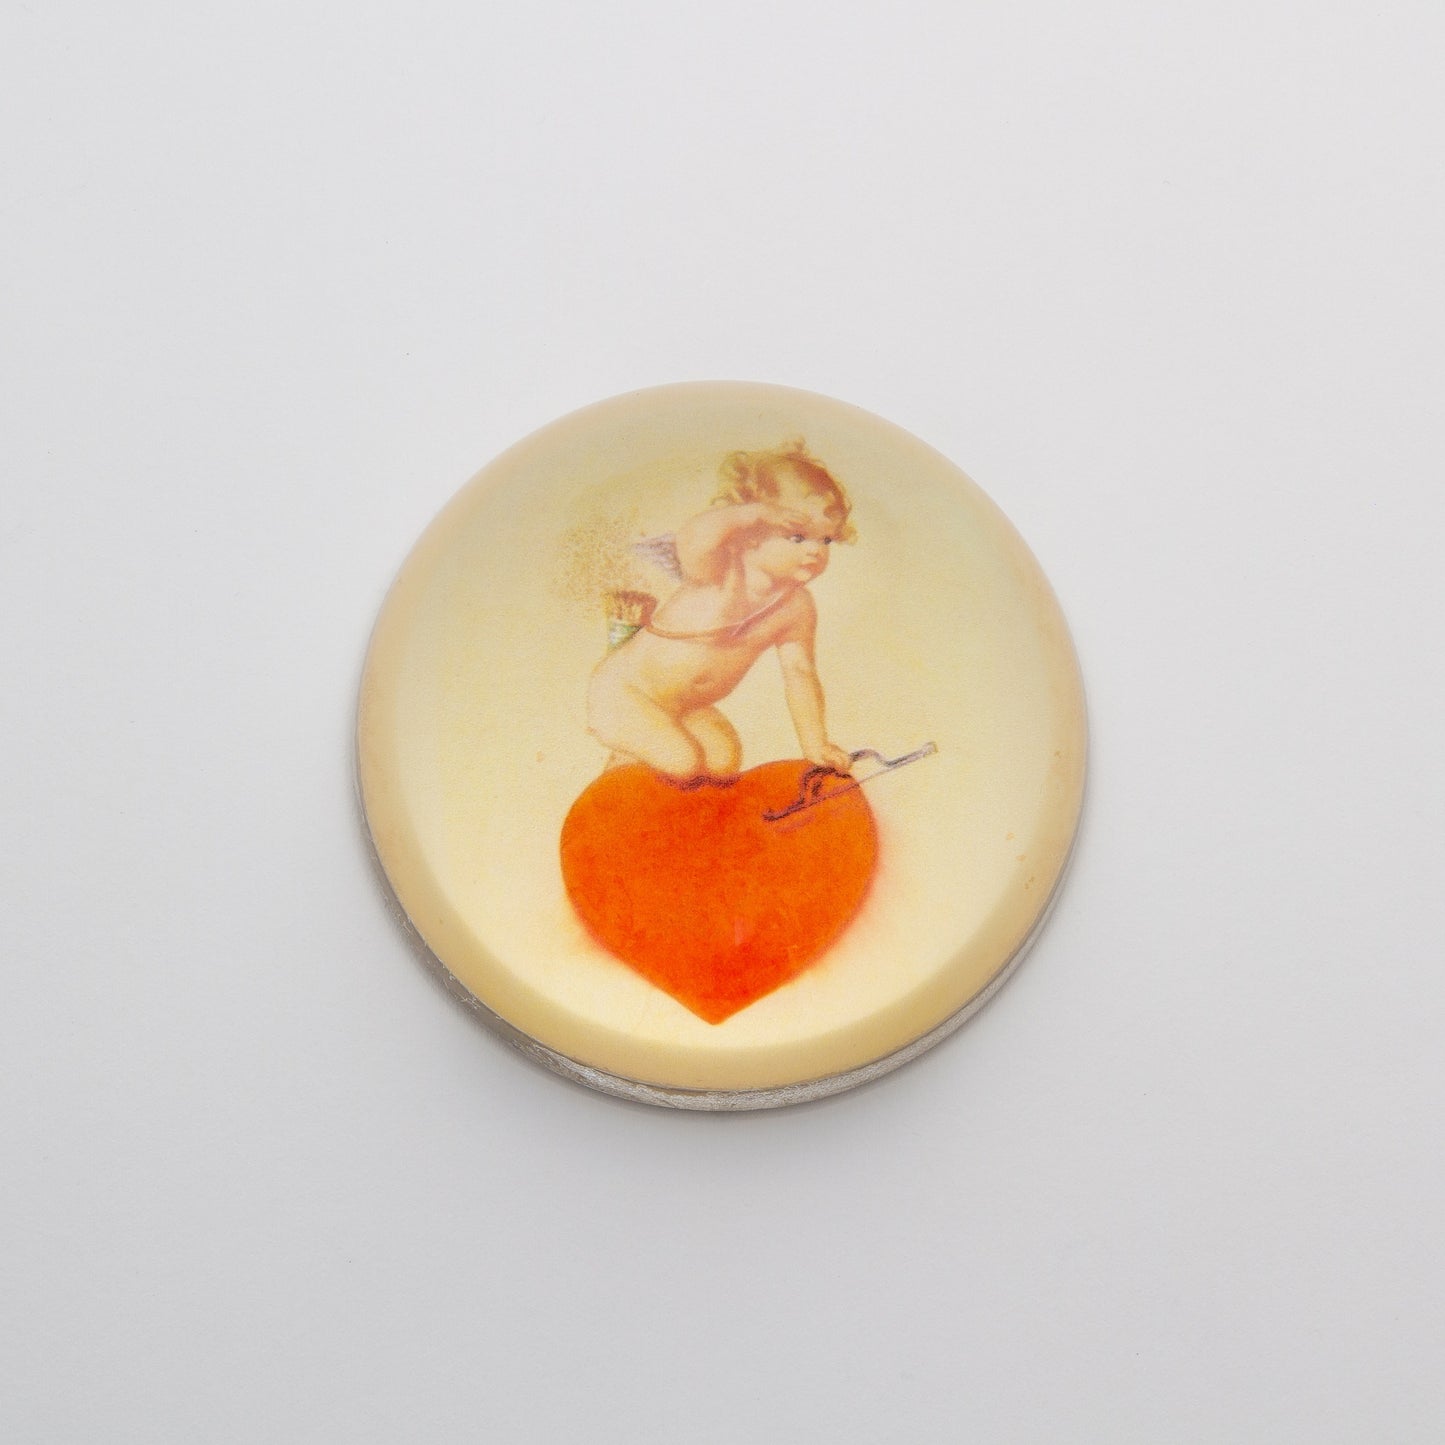 Cupid Kneeling on a Red Heart - Crystal Dome Decoupaged Paperweight